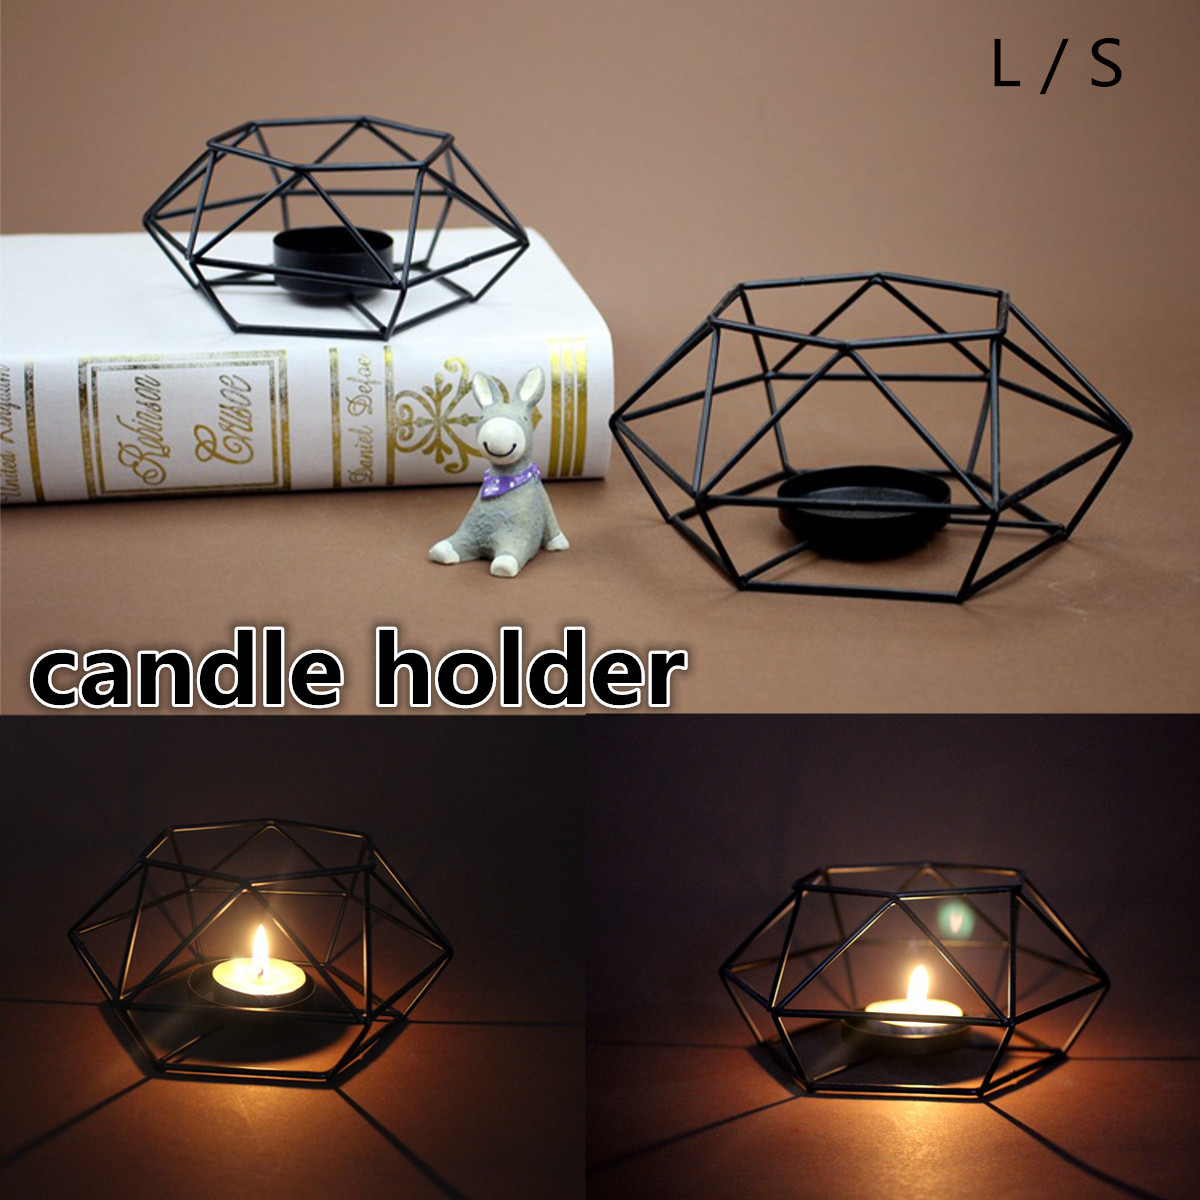 Metal-Wire-Candlestick-Tea-Light-Candle-Holder-Tabletop-Decor-Industrial-Lantern-1557426-3